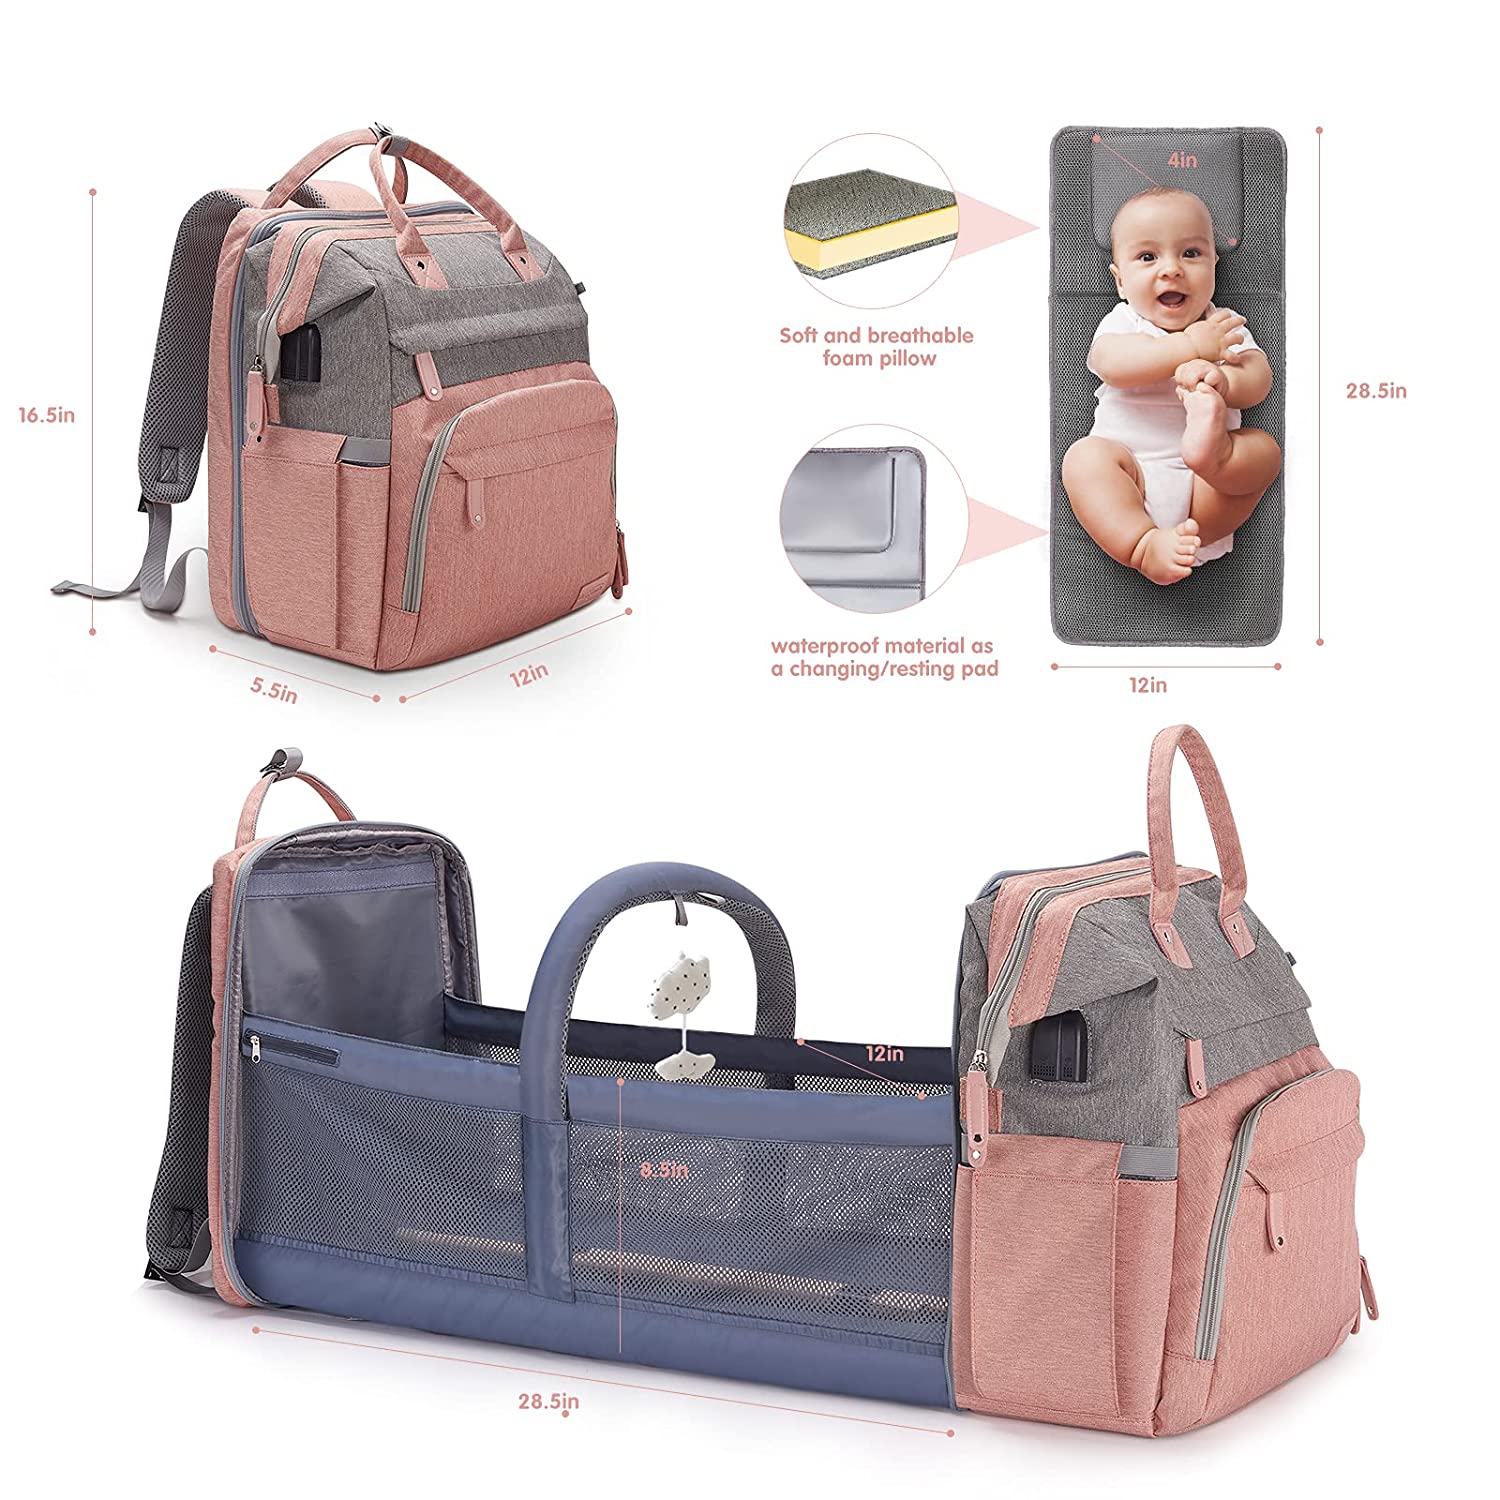 SNDMOR Diaper Bag Backpack, Baby Diaper Bag with Changing Table